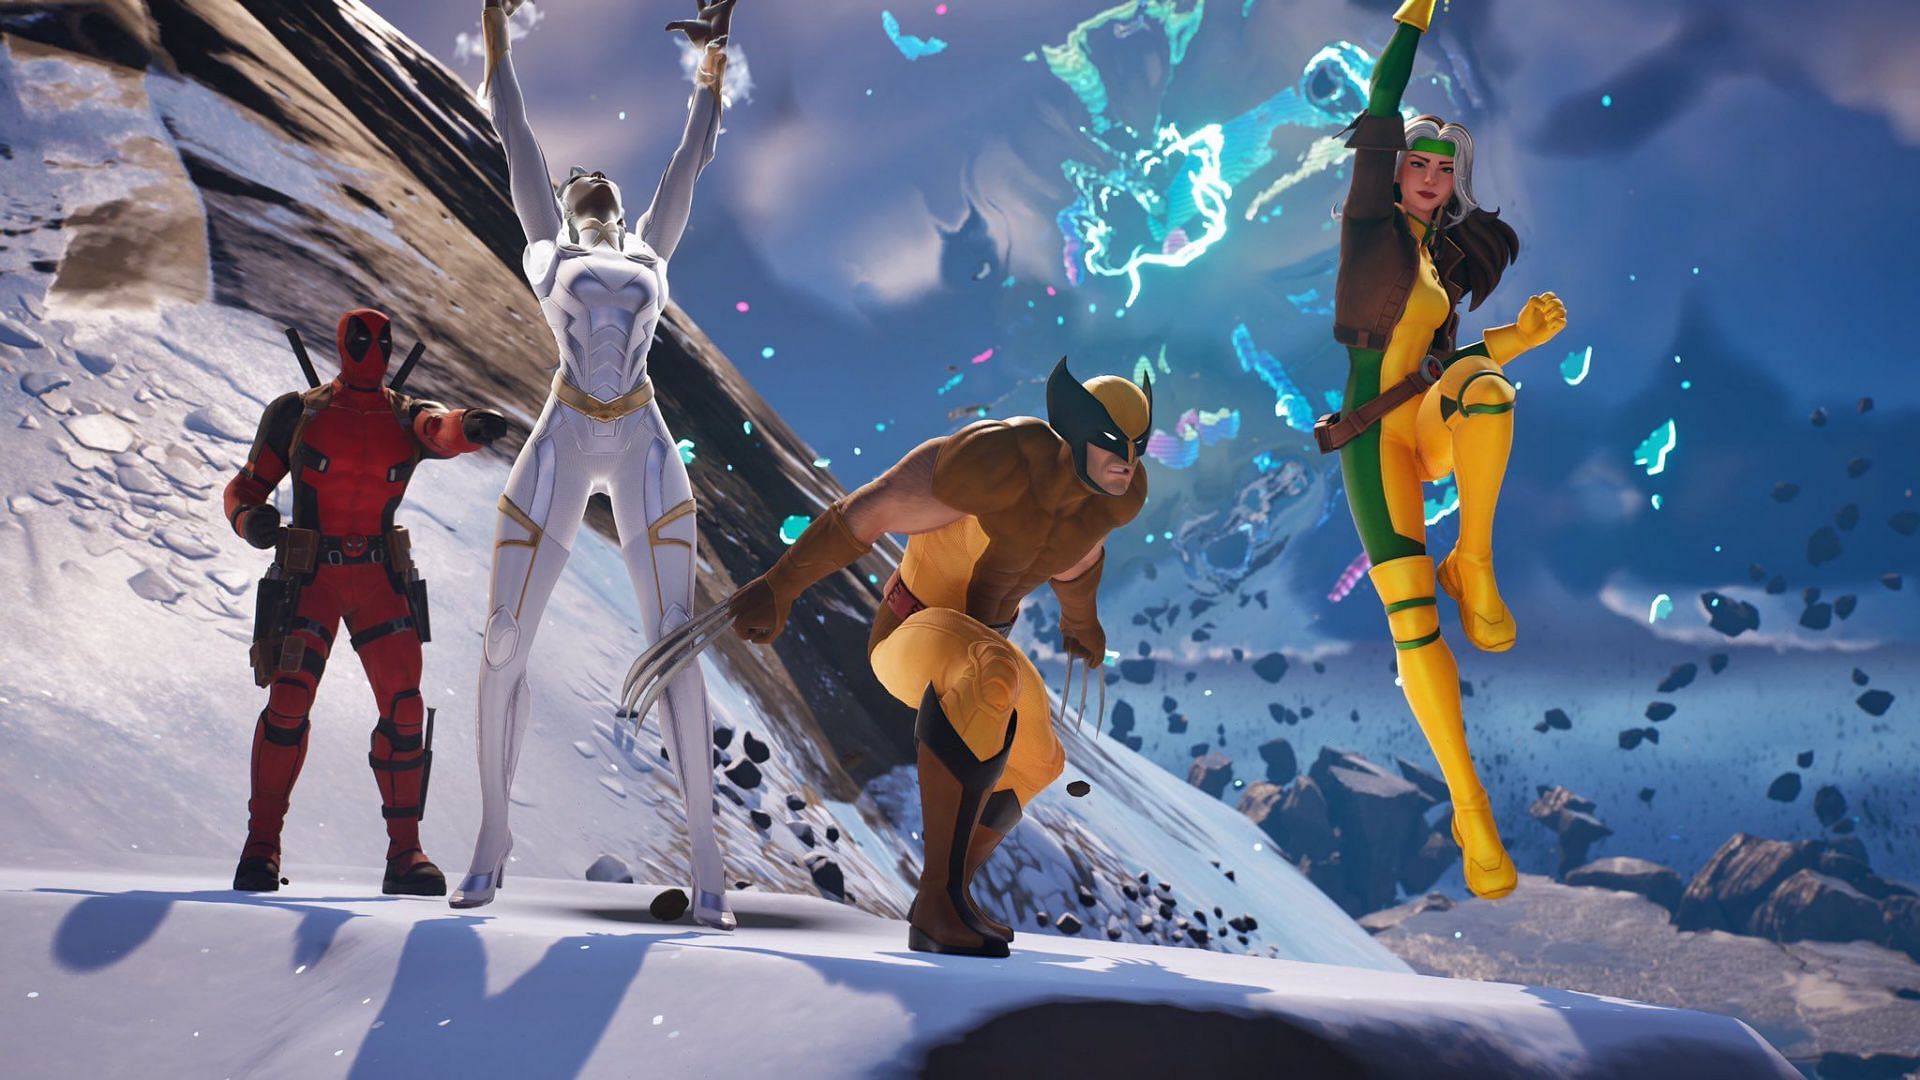 Cyclops and Magneto skins coming soon (Image via Epic Games/Fortnite||X/TheBlxxdSxn)